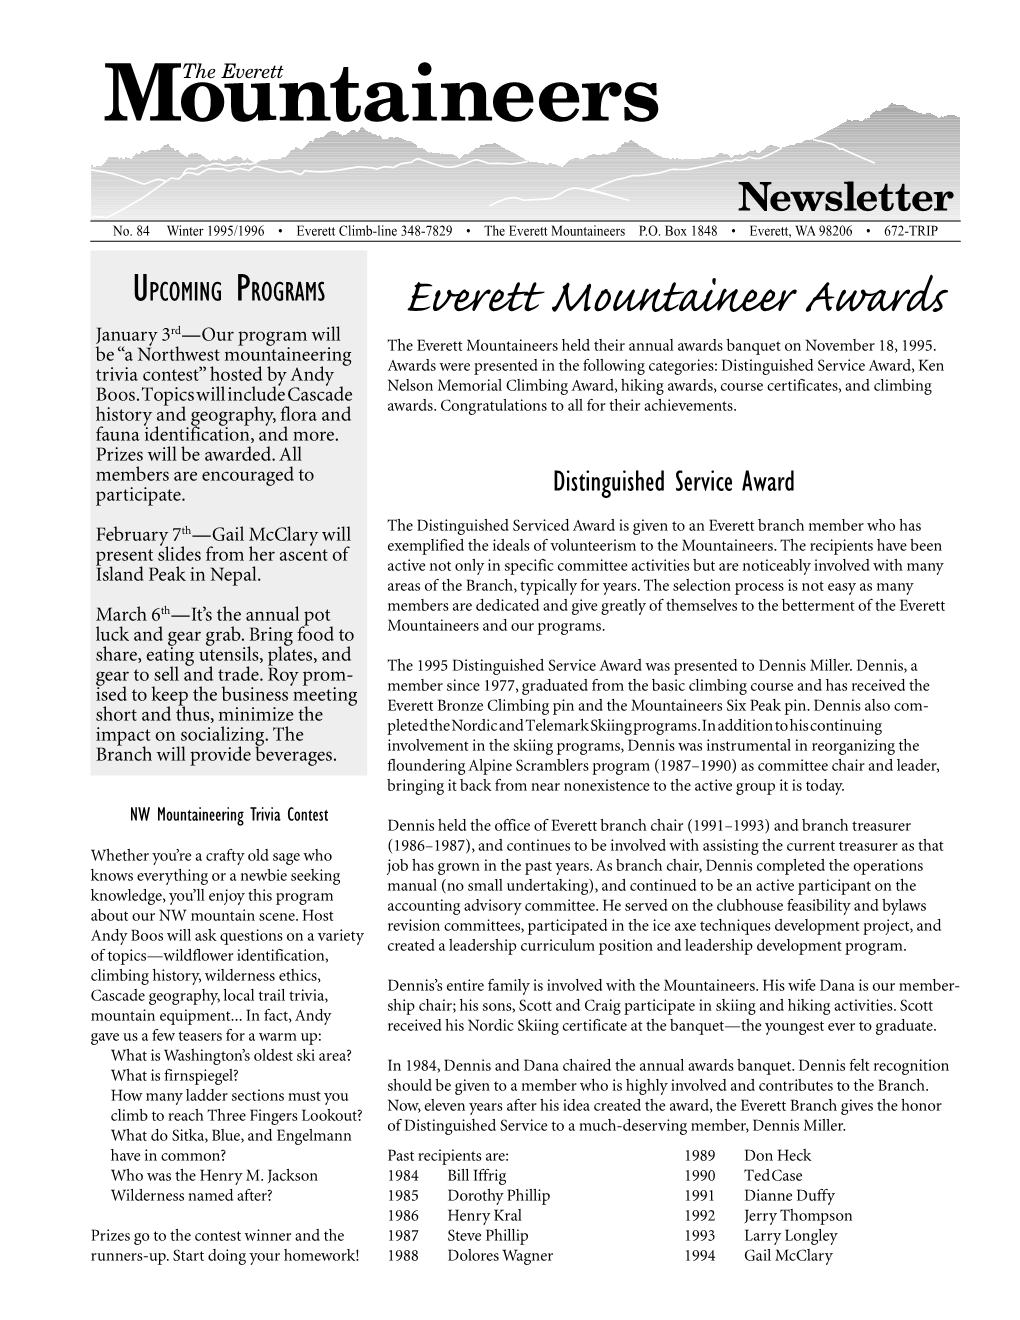 Everett Mountaineer Awards January 3Rd—Our Program Will Be “A Northwest Mountaineering the Everett Mountaineers Held Their Annual Awards Banquet on November 18, 1995